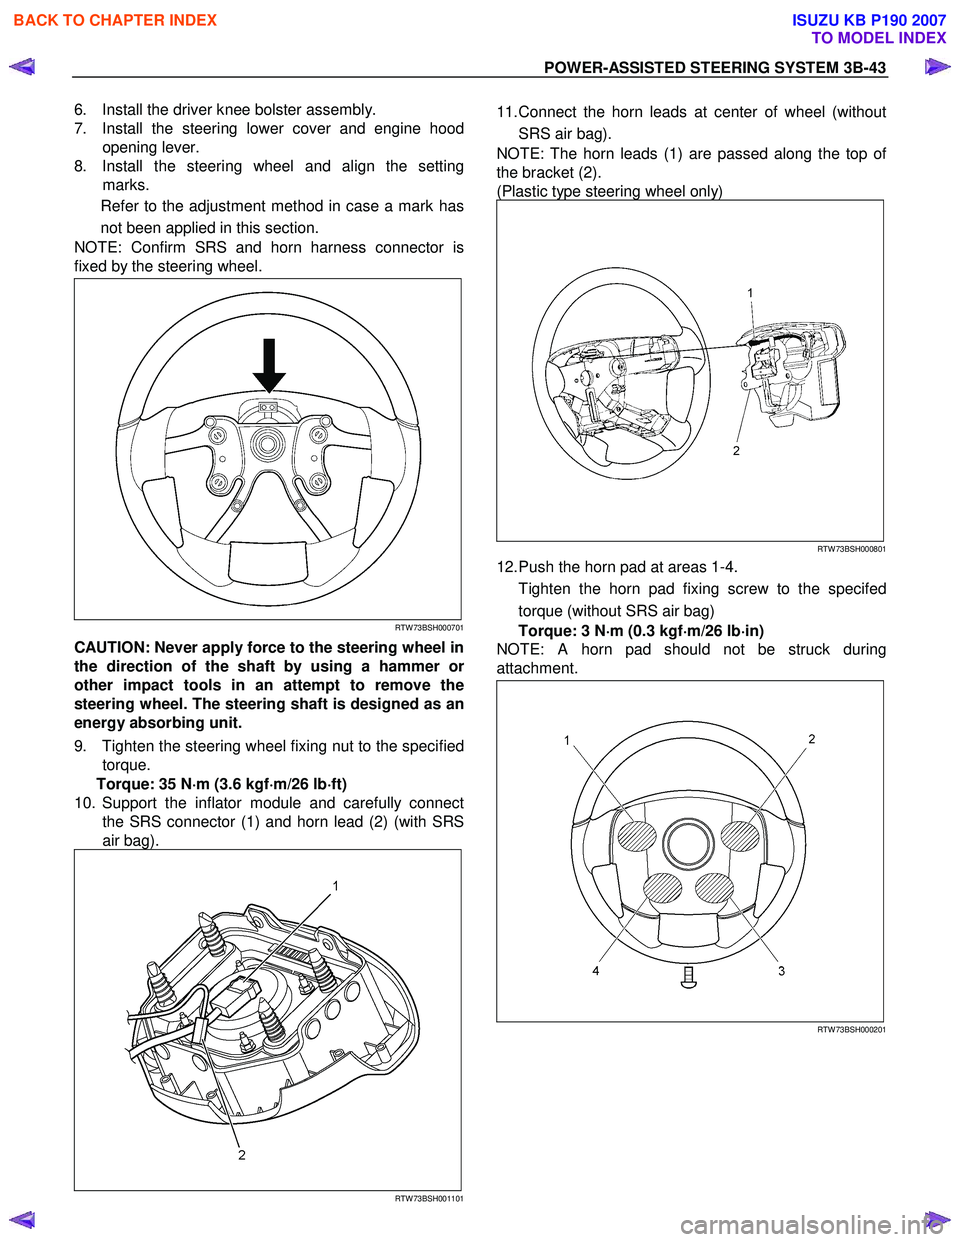 ISUZU KB P190 2007  Workshop Repair Manual POWER-ASSISTED STEERING SYSTEM 3B-43 
6.  Install the driver knee bolster assembly.  
7.  Install the steering lower cover and engine hood opening lever. 
8.  Install the steering wheel and align the 